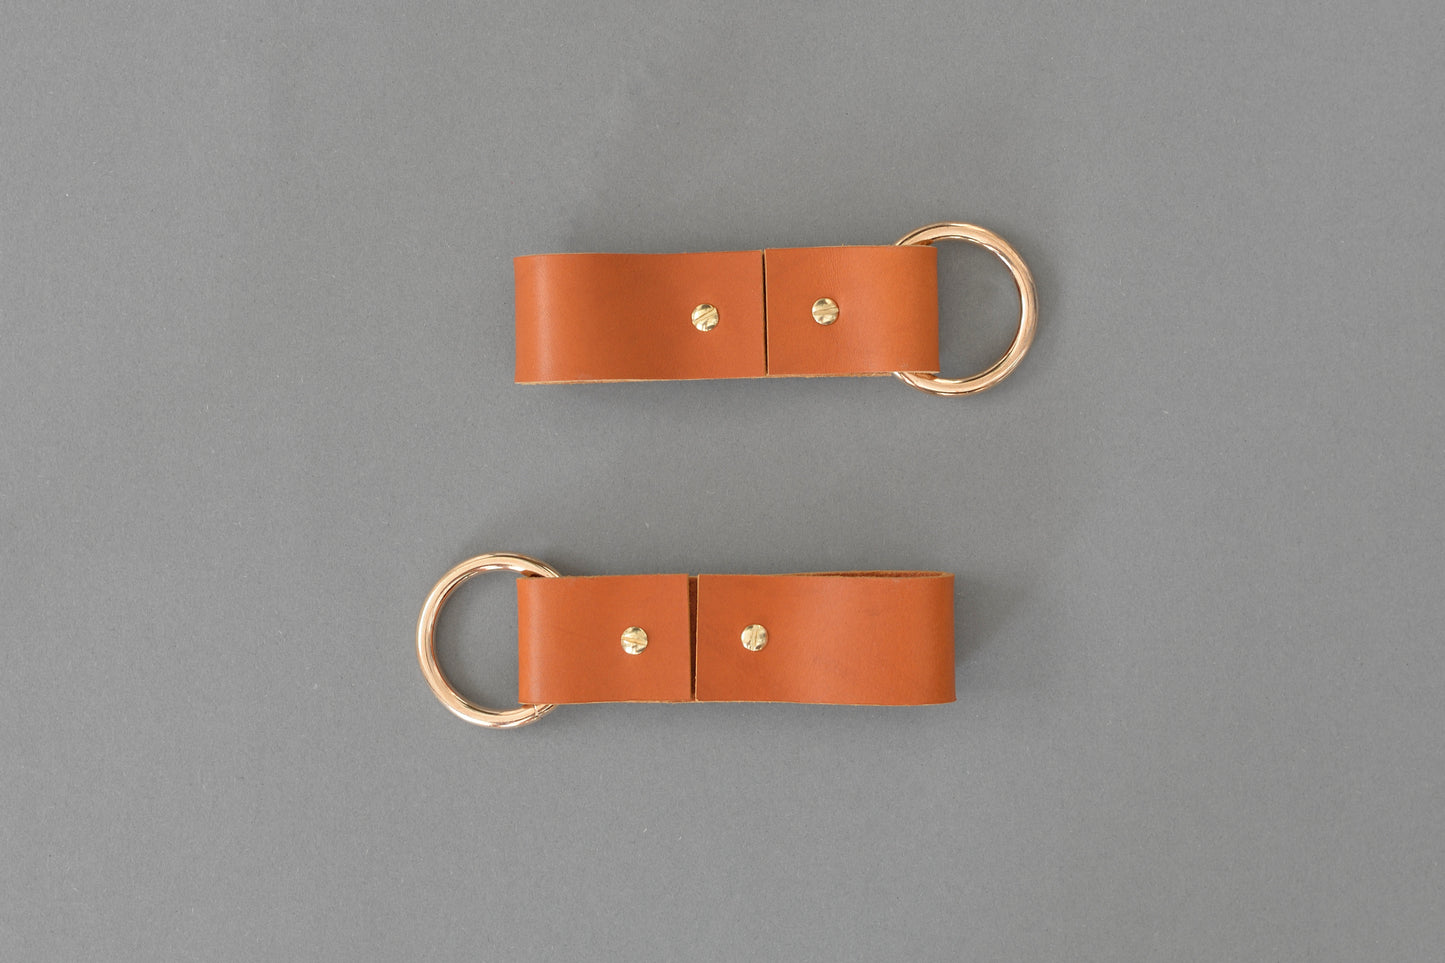 Light Brown Ceiling-Mounted Leather Strap Lade Maxi #2 - 2 pieces 